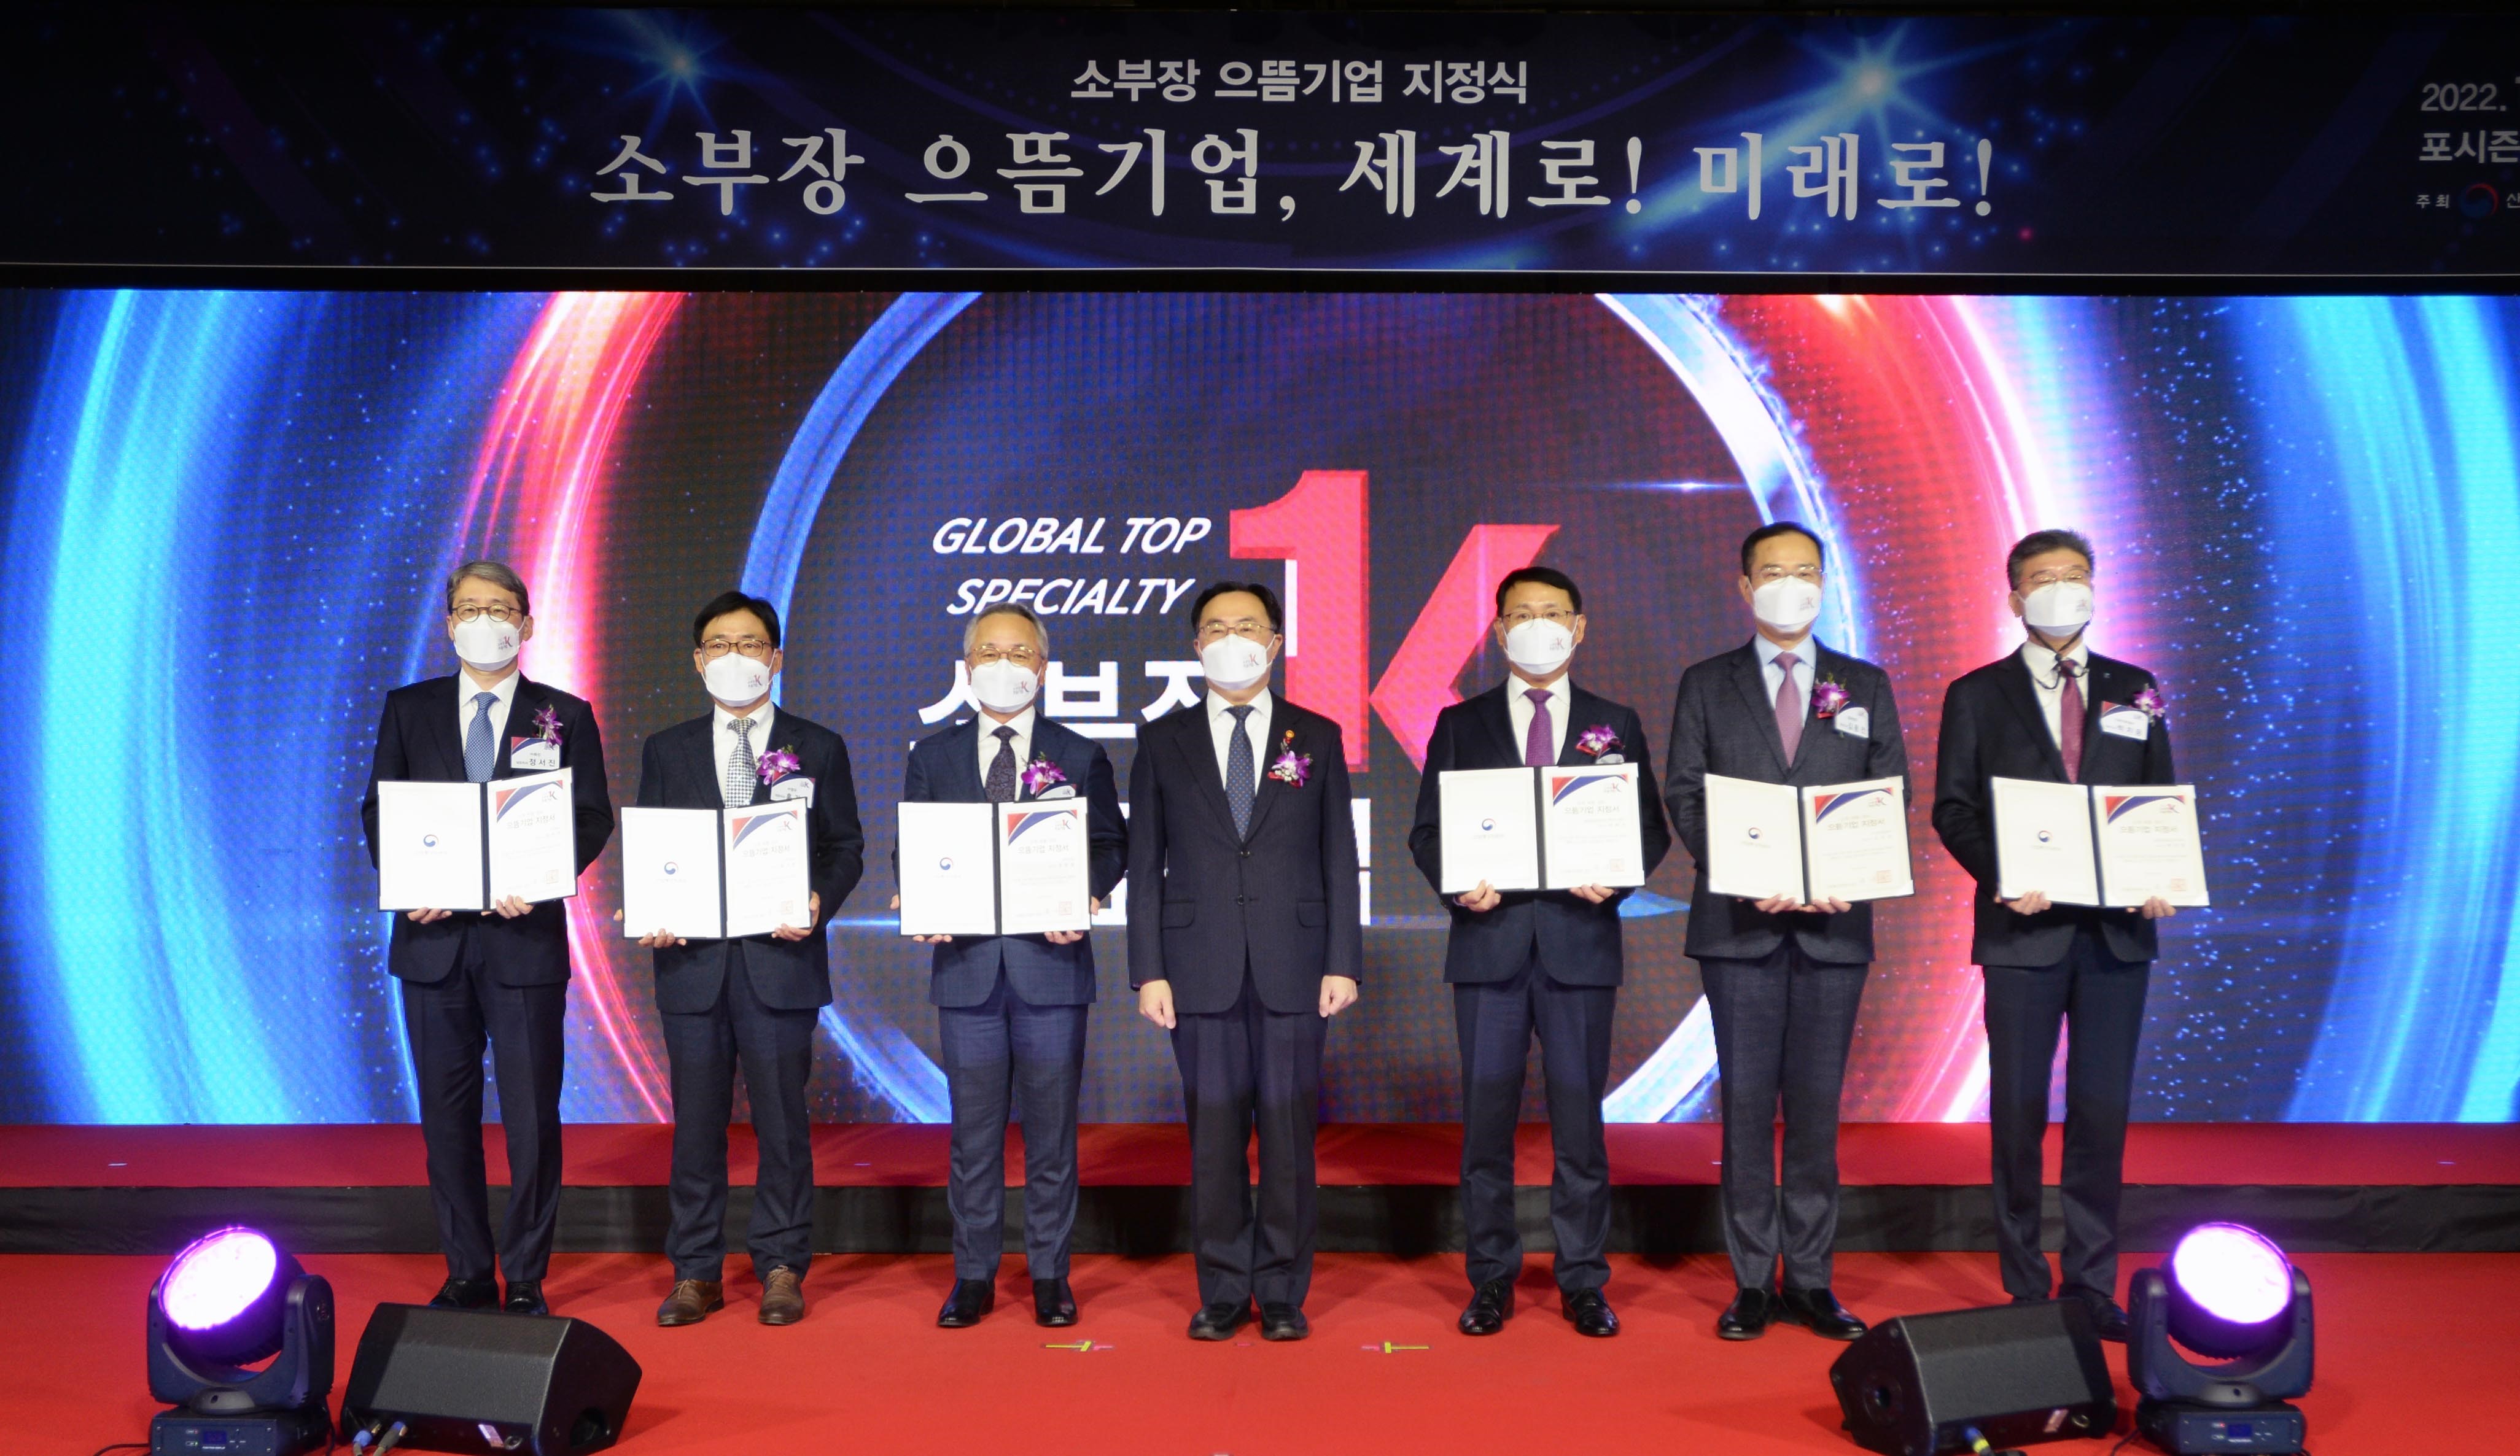 2022 MPE Global Top Specialty Awards Ceremony.jpg 1